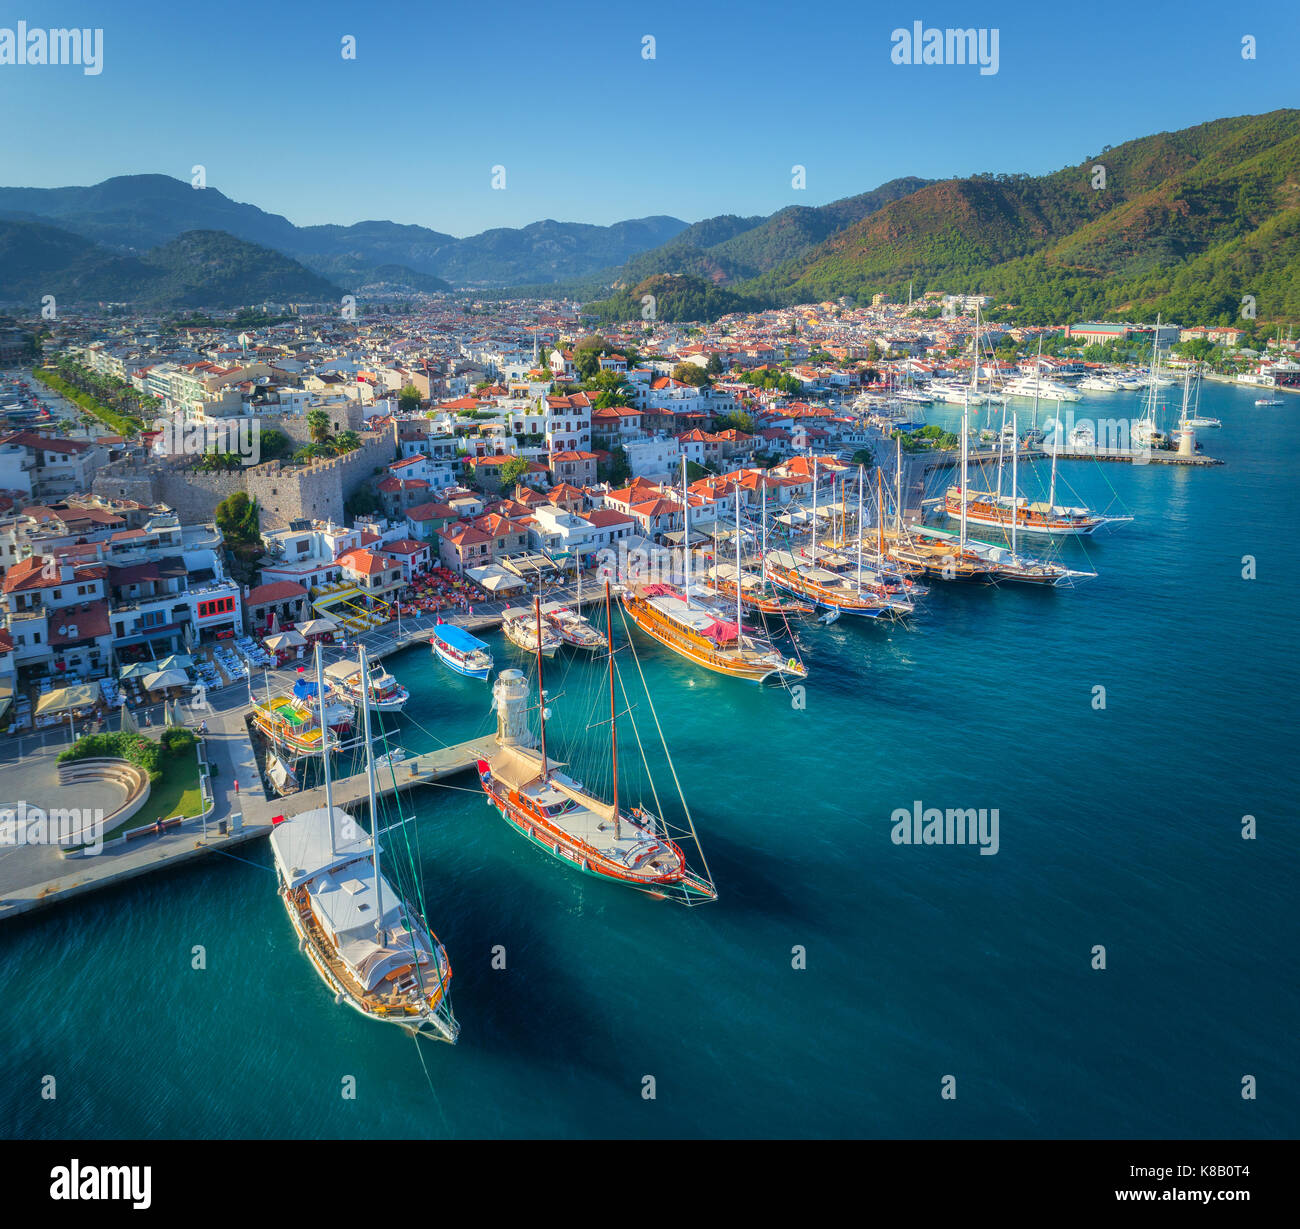 Aerial view of boats and beautiful architecture at sunset in Marmaris, Turkey. Colorful landscape with boats in marina bay, sea, city, mountains. Top  Stock Photo